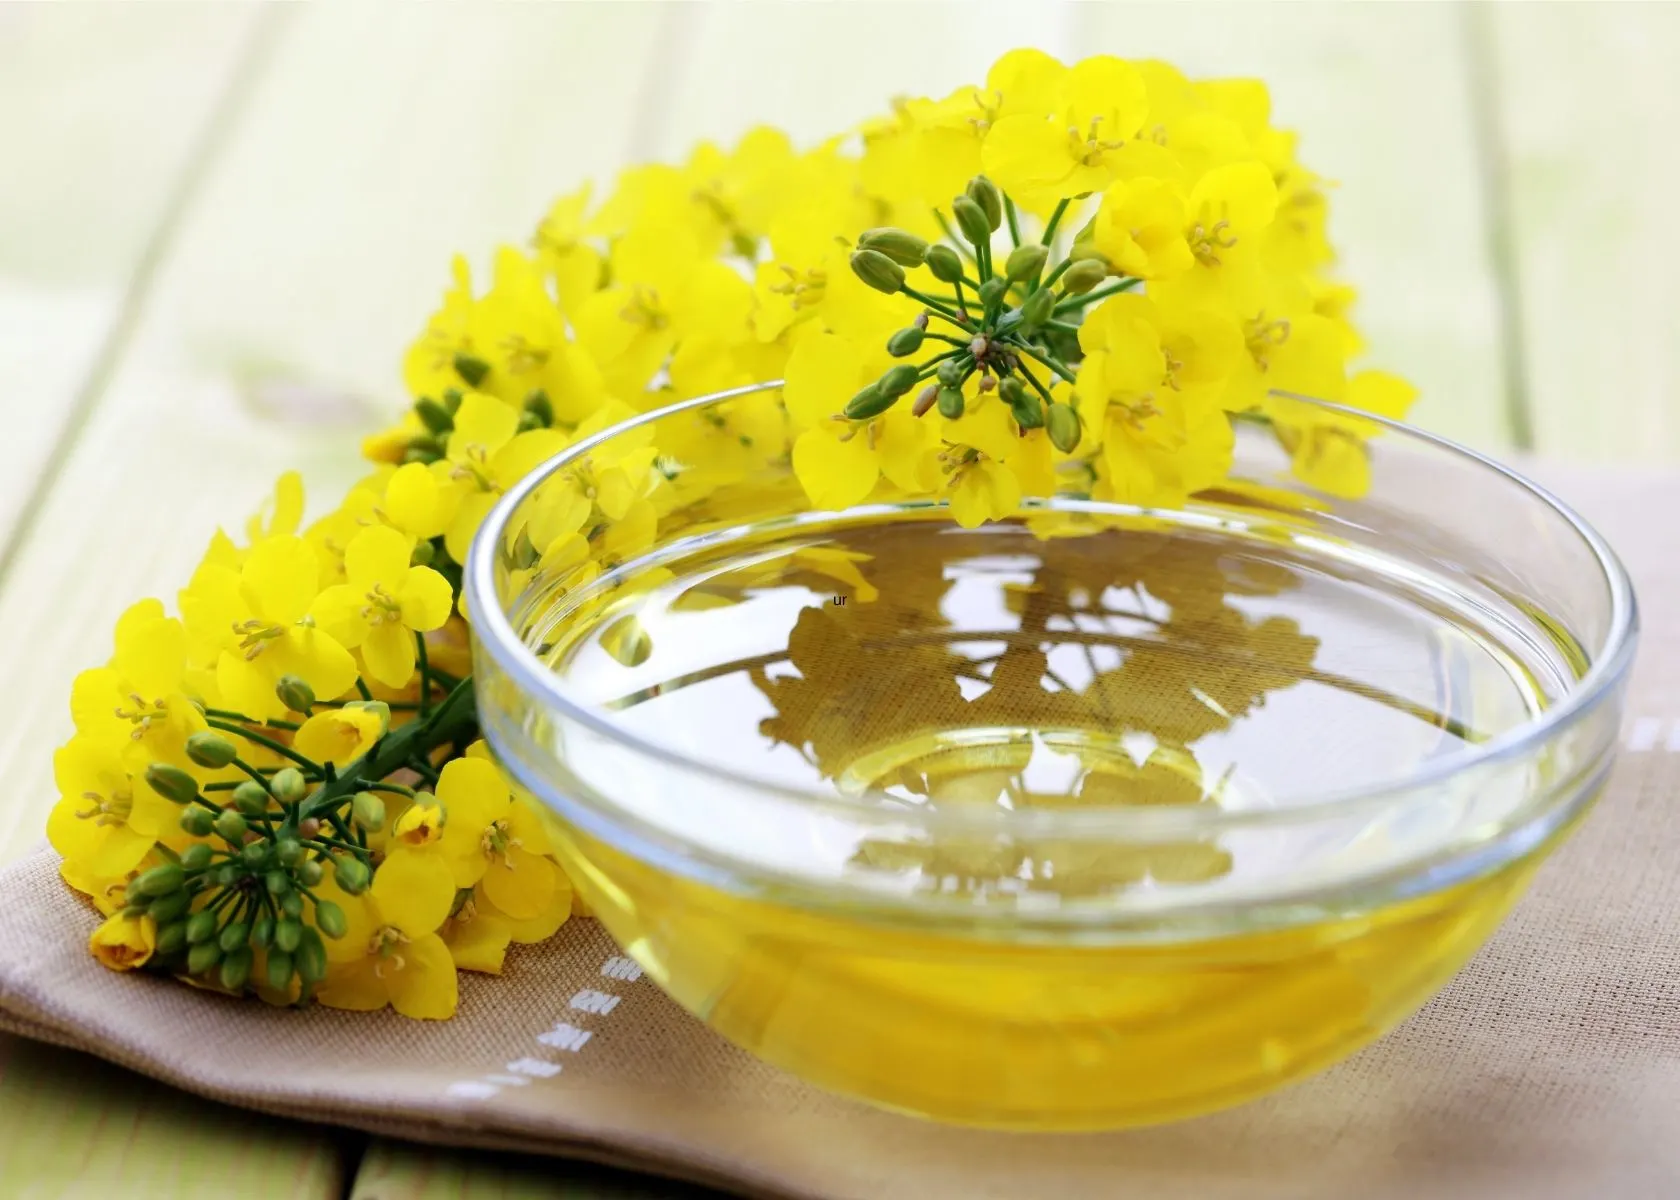 Canola oil in glass bowl next to bright yellow flowers from the plant.